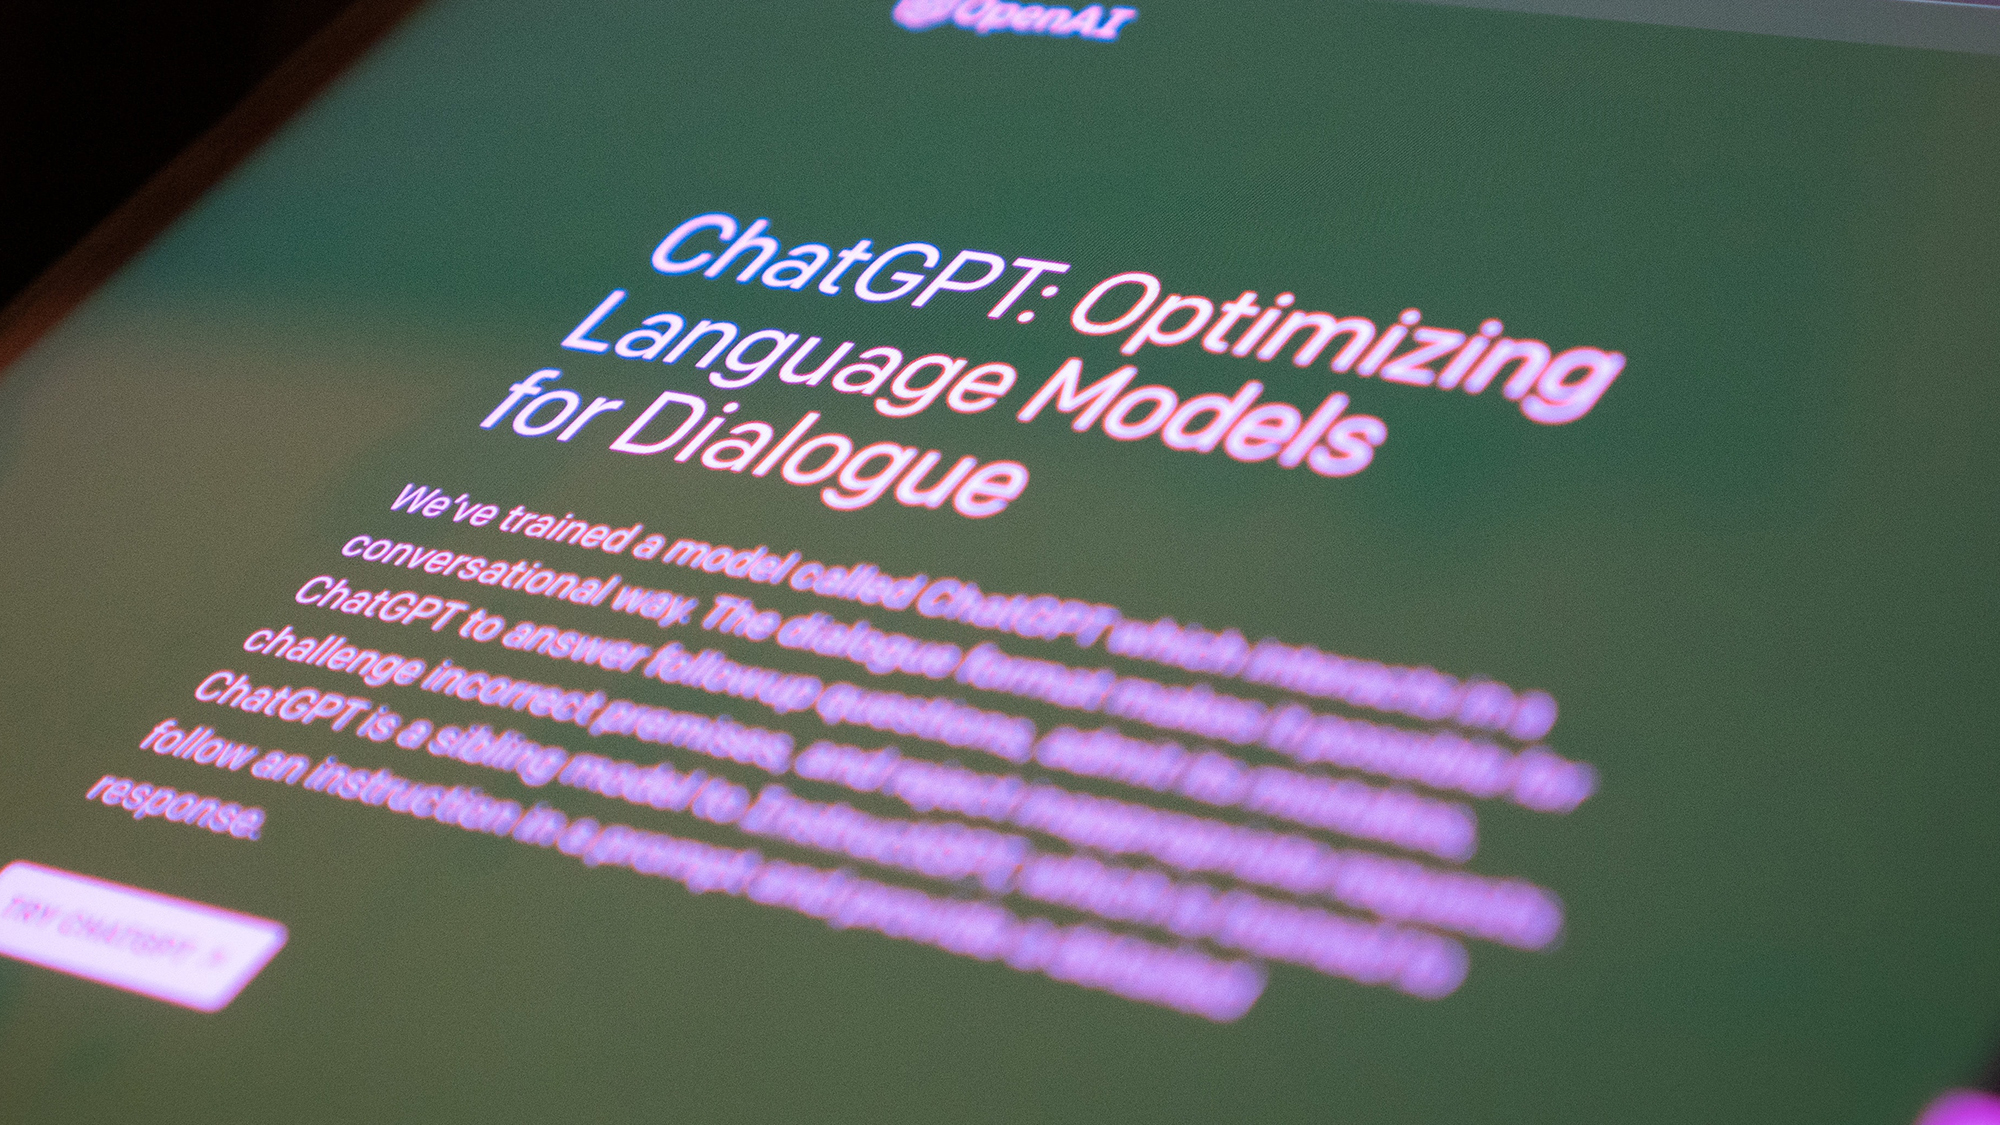 6 ways ChatGPT is actually useful right now